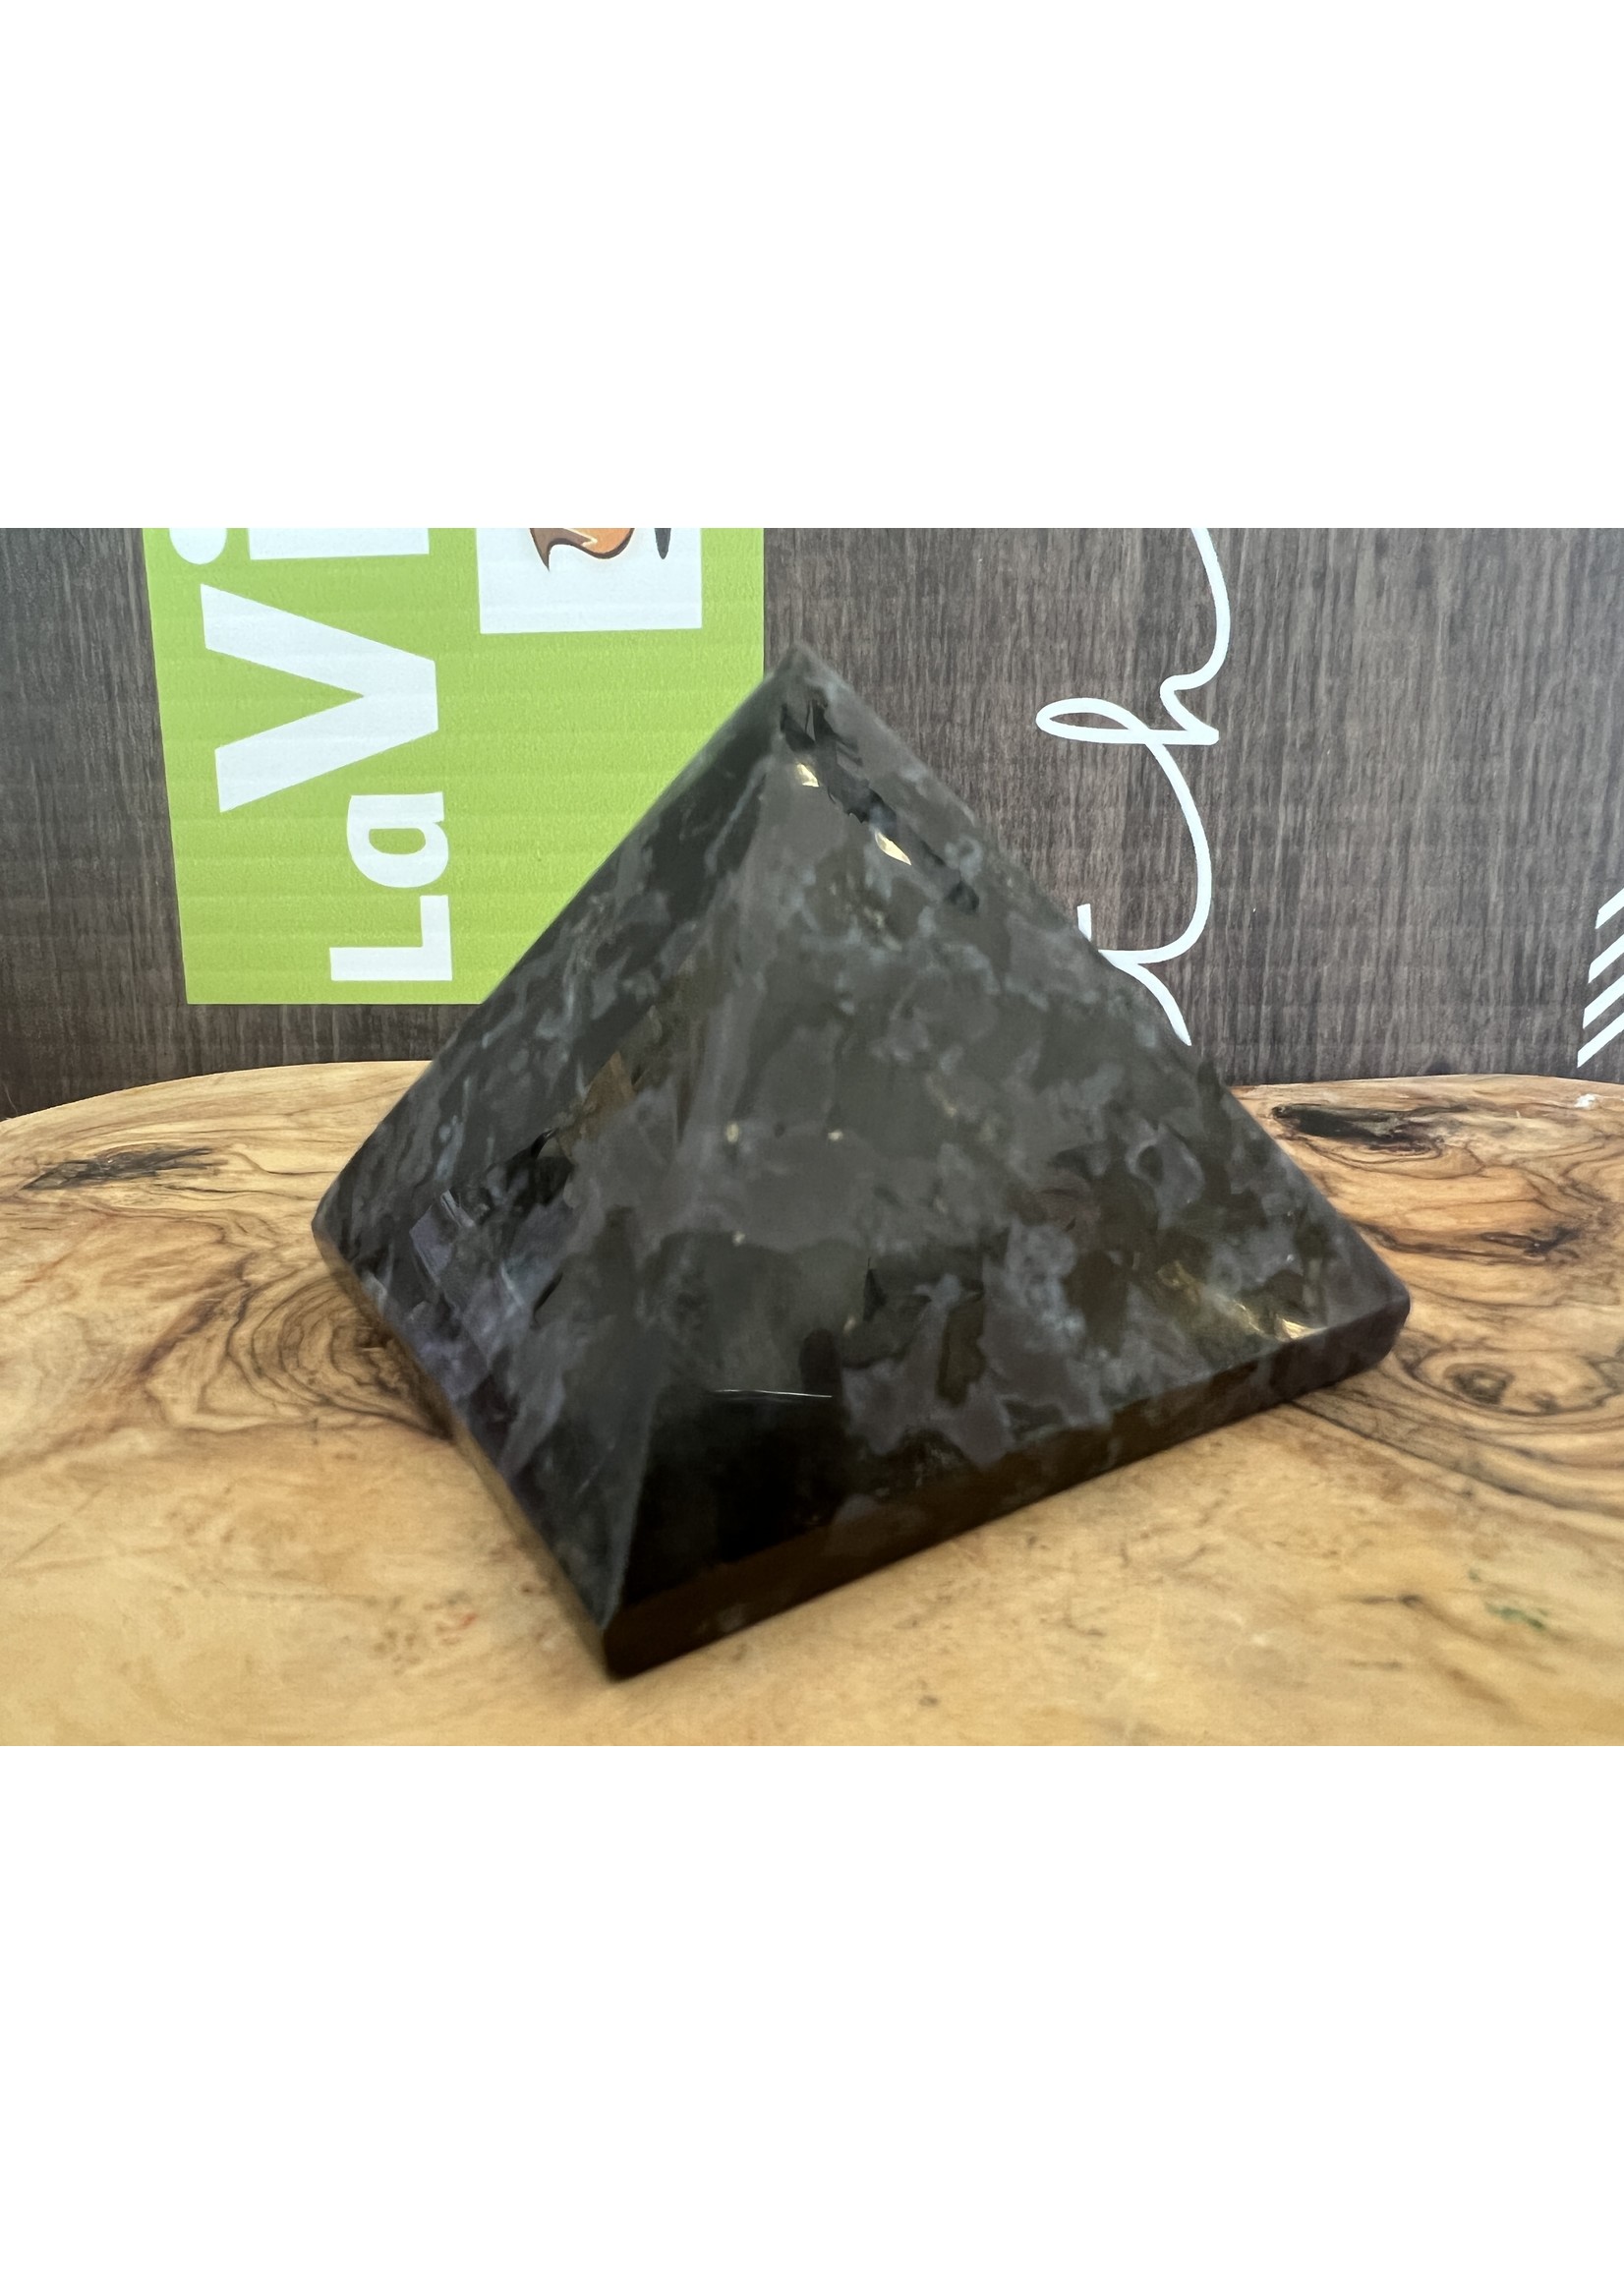 beautiful pyramid merlinite gabbro , also called mystical merlinite, stone in homage to the magician Merlin, it would be a magic stone